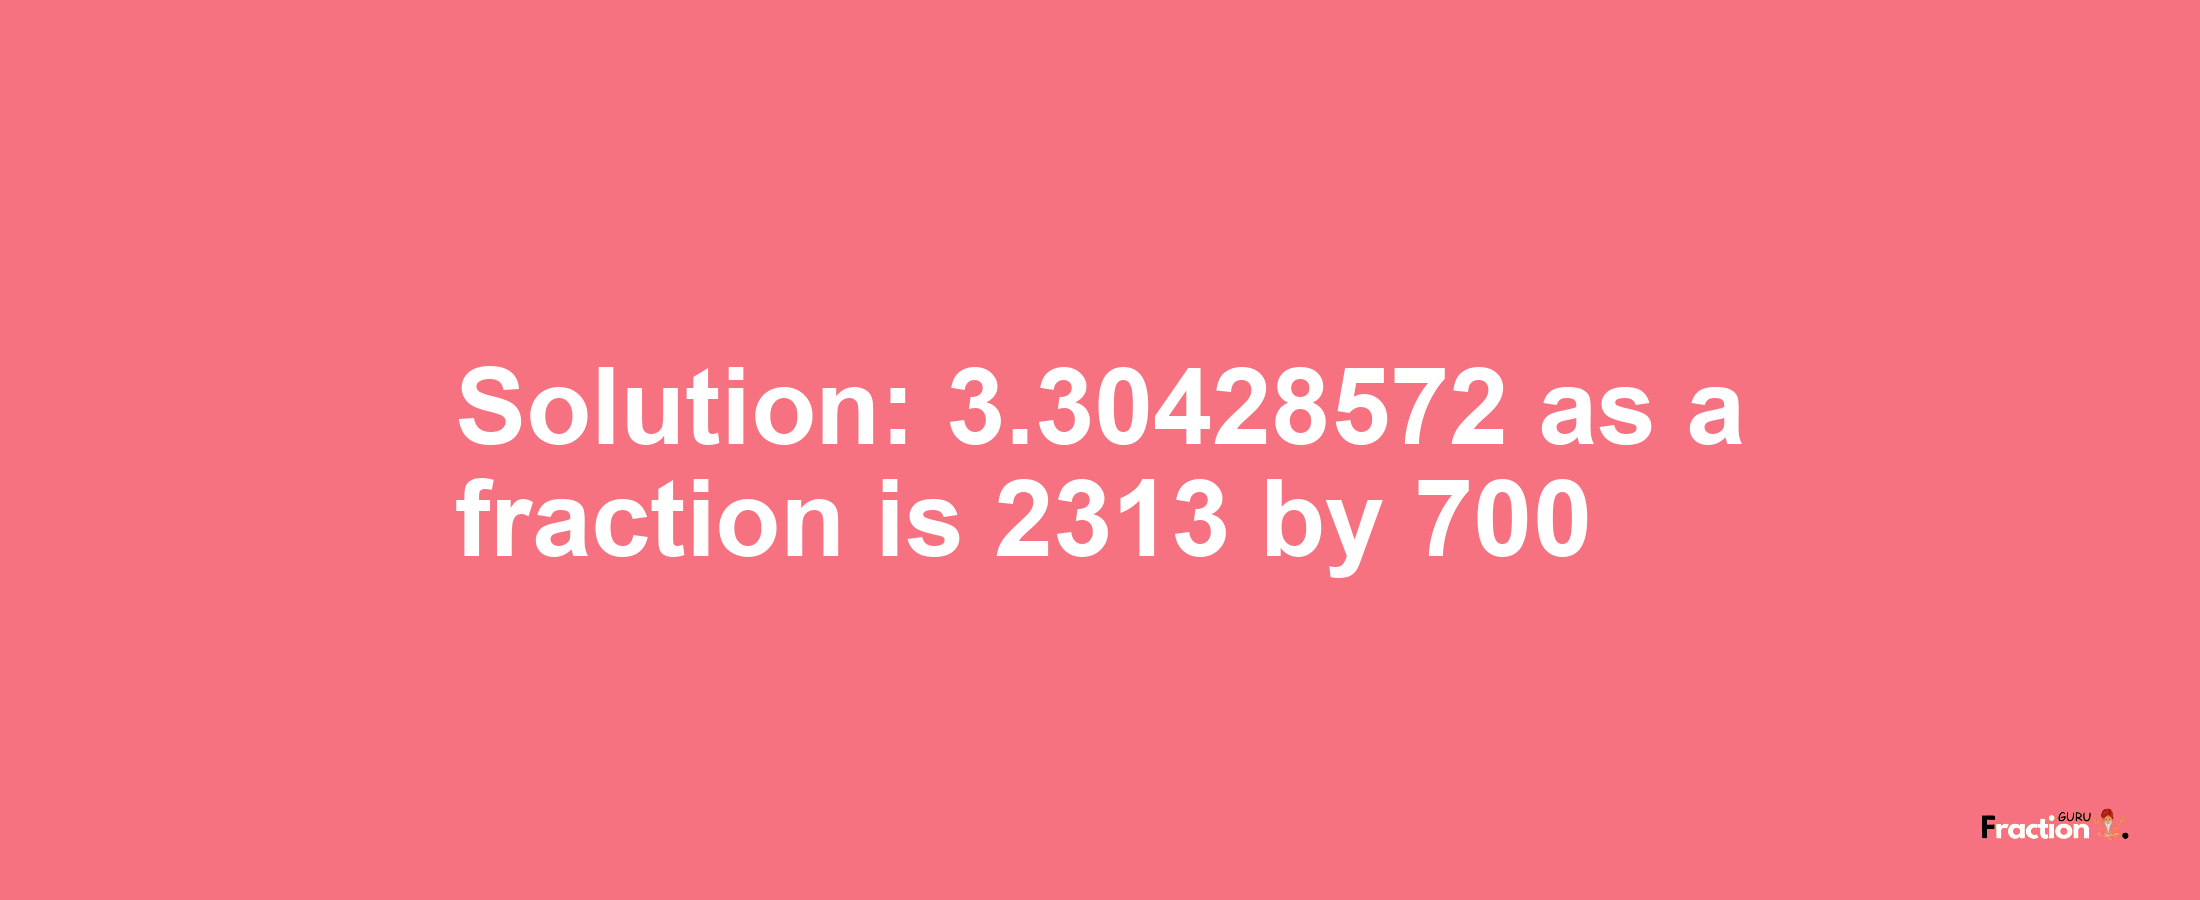 Solution:3.30428572 as a fraction is 2313/700